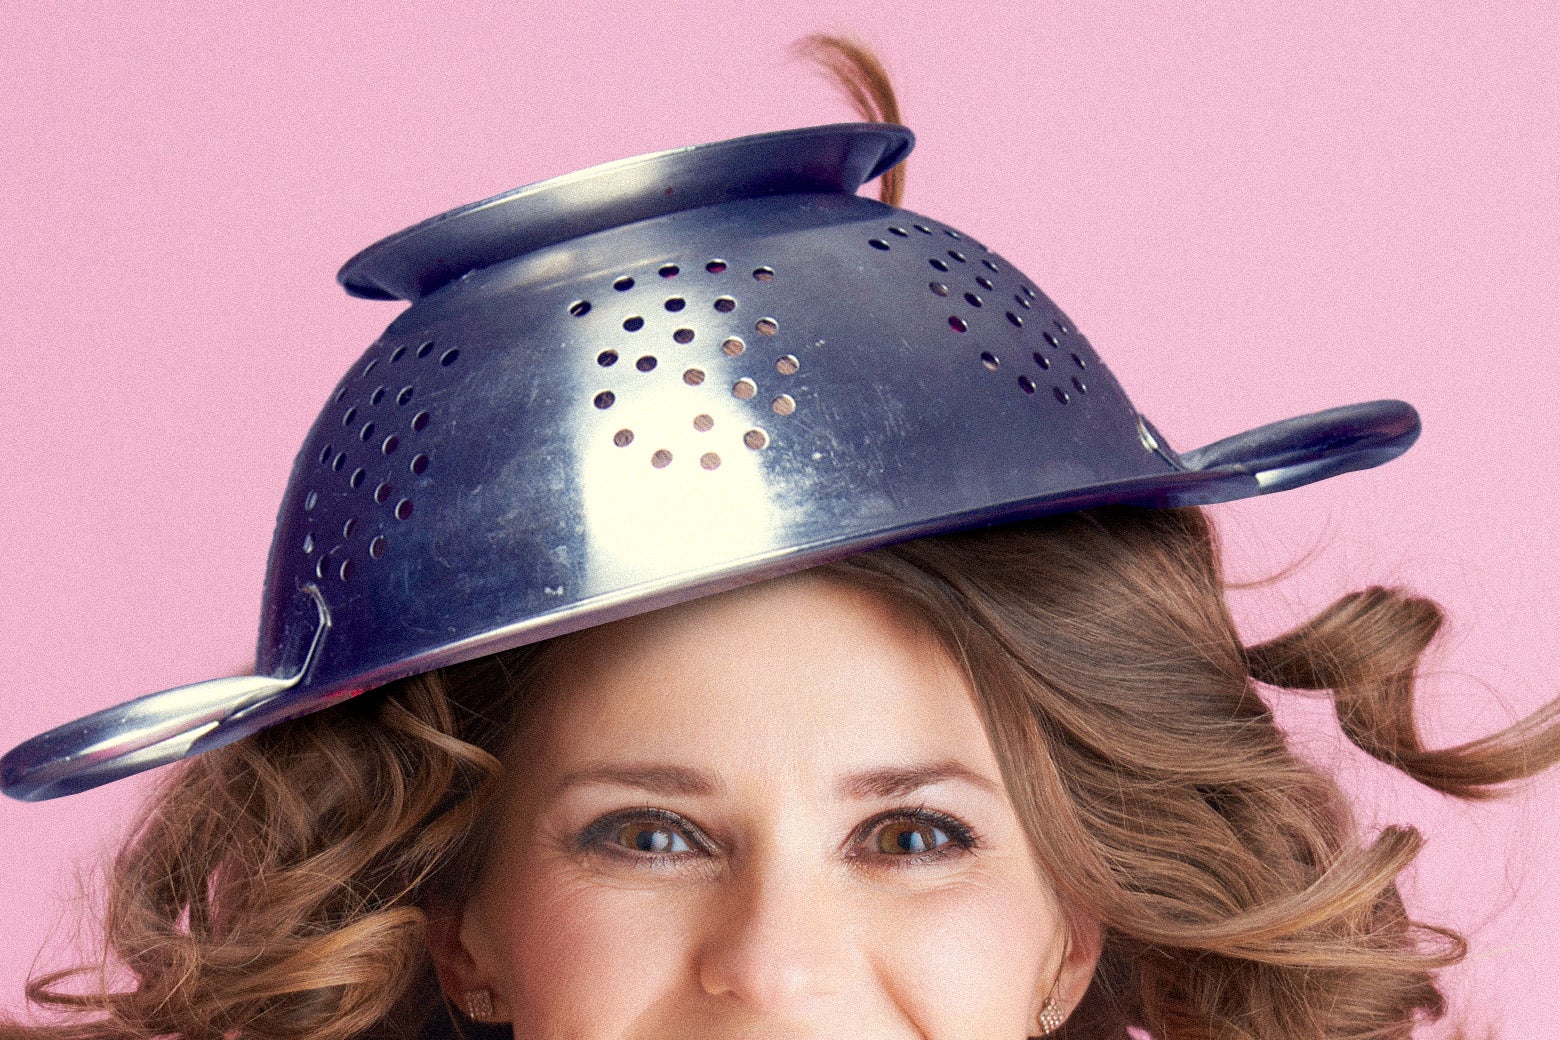 A woman wearing a pasta strainer on her head.